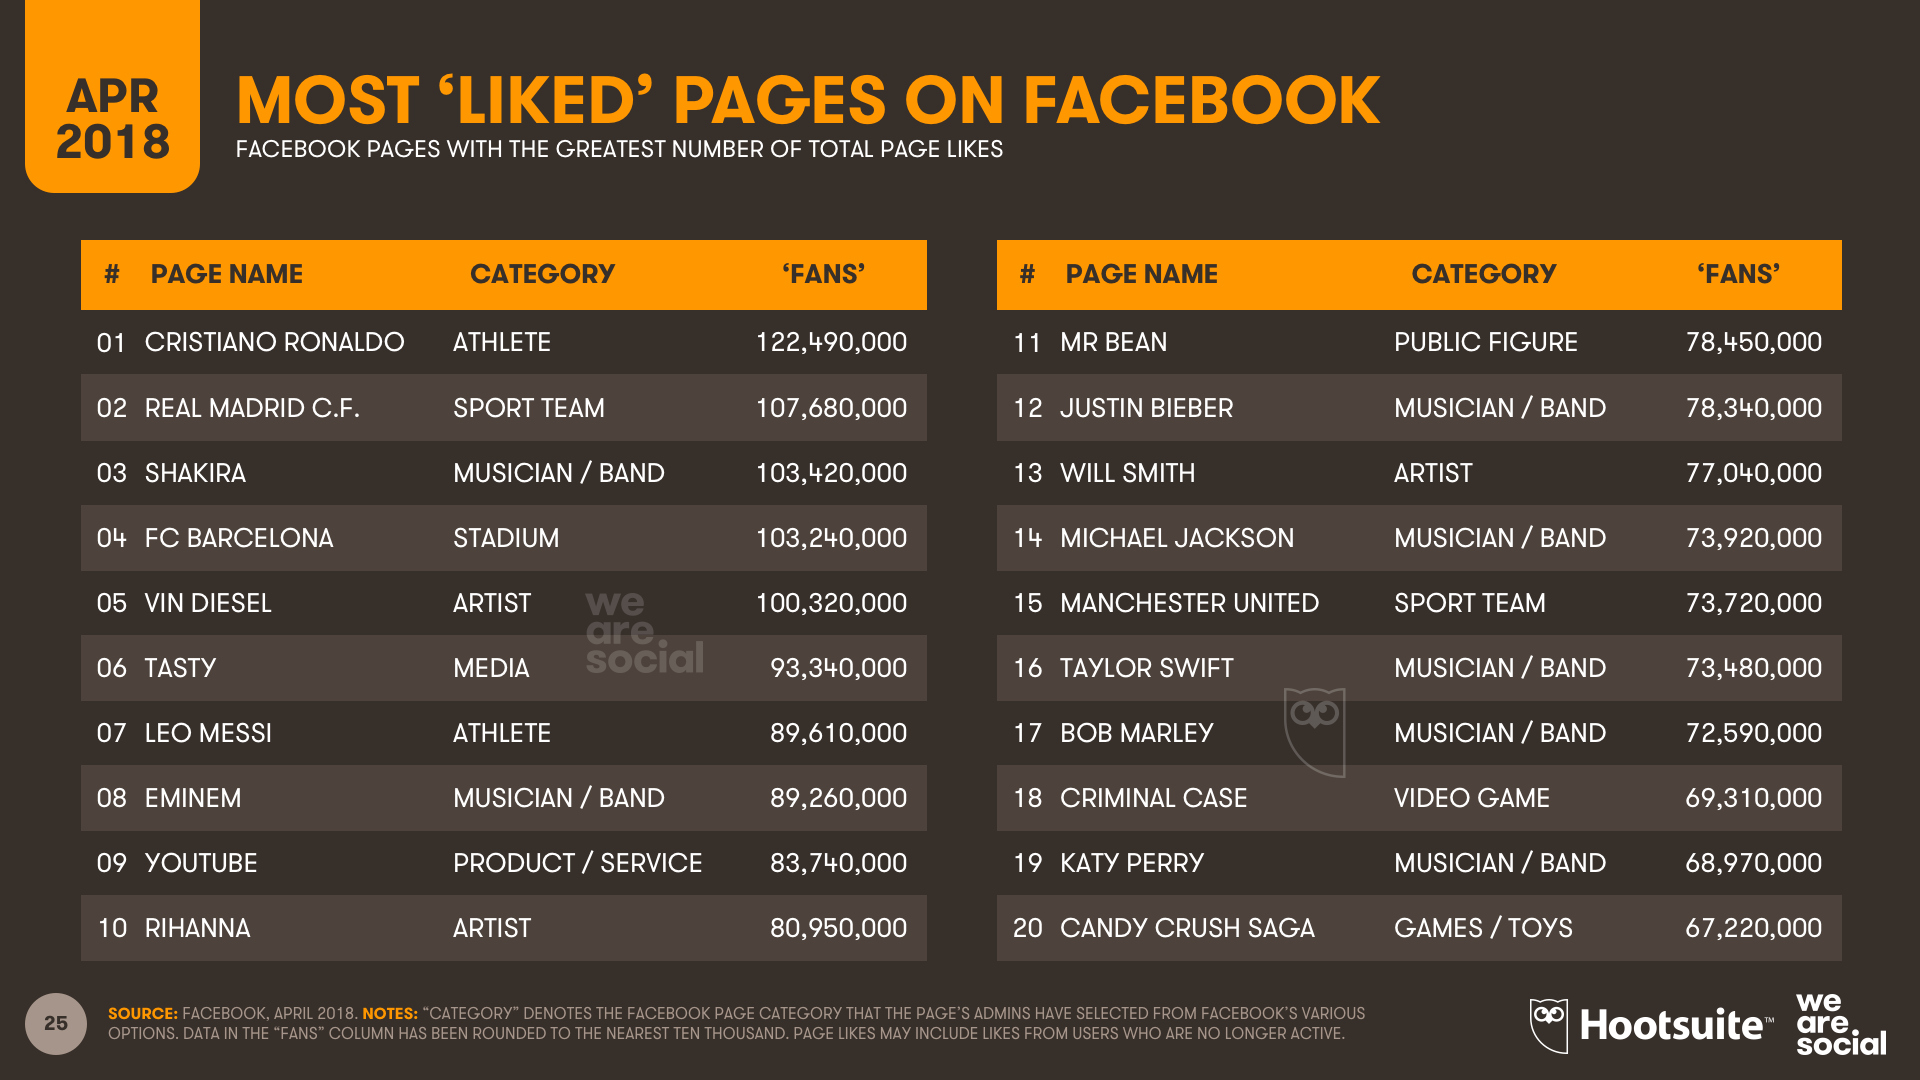 Top Facebook Pages - Q1 2018